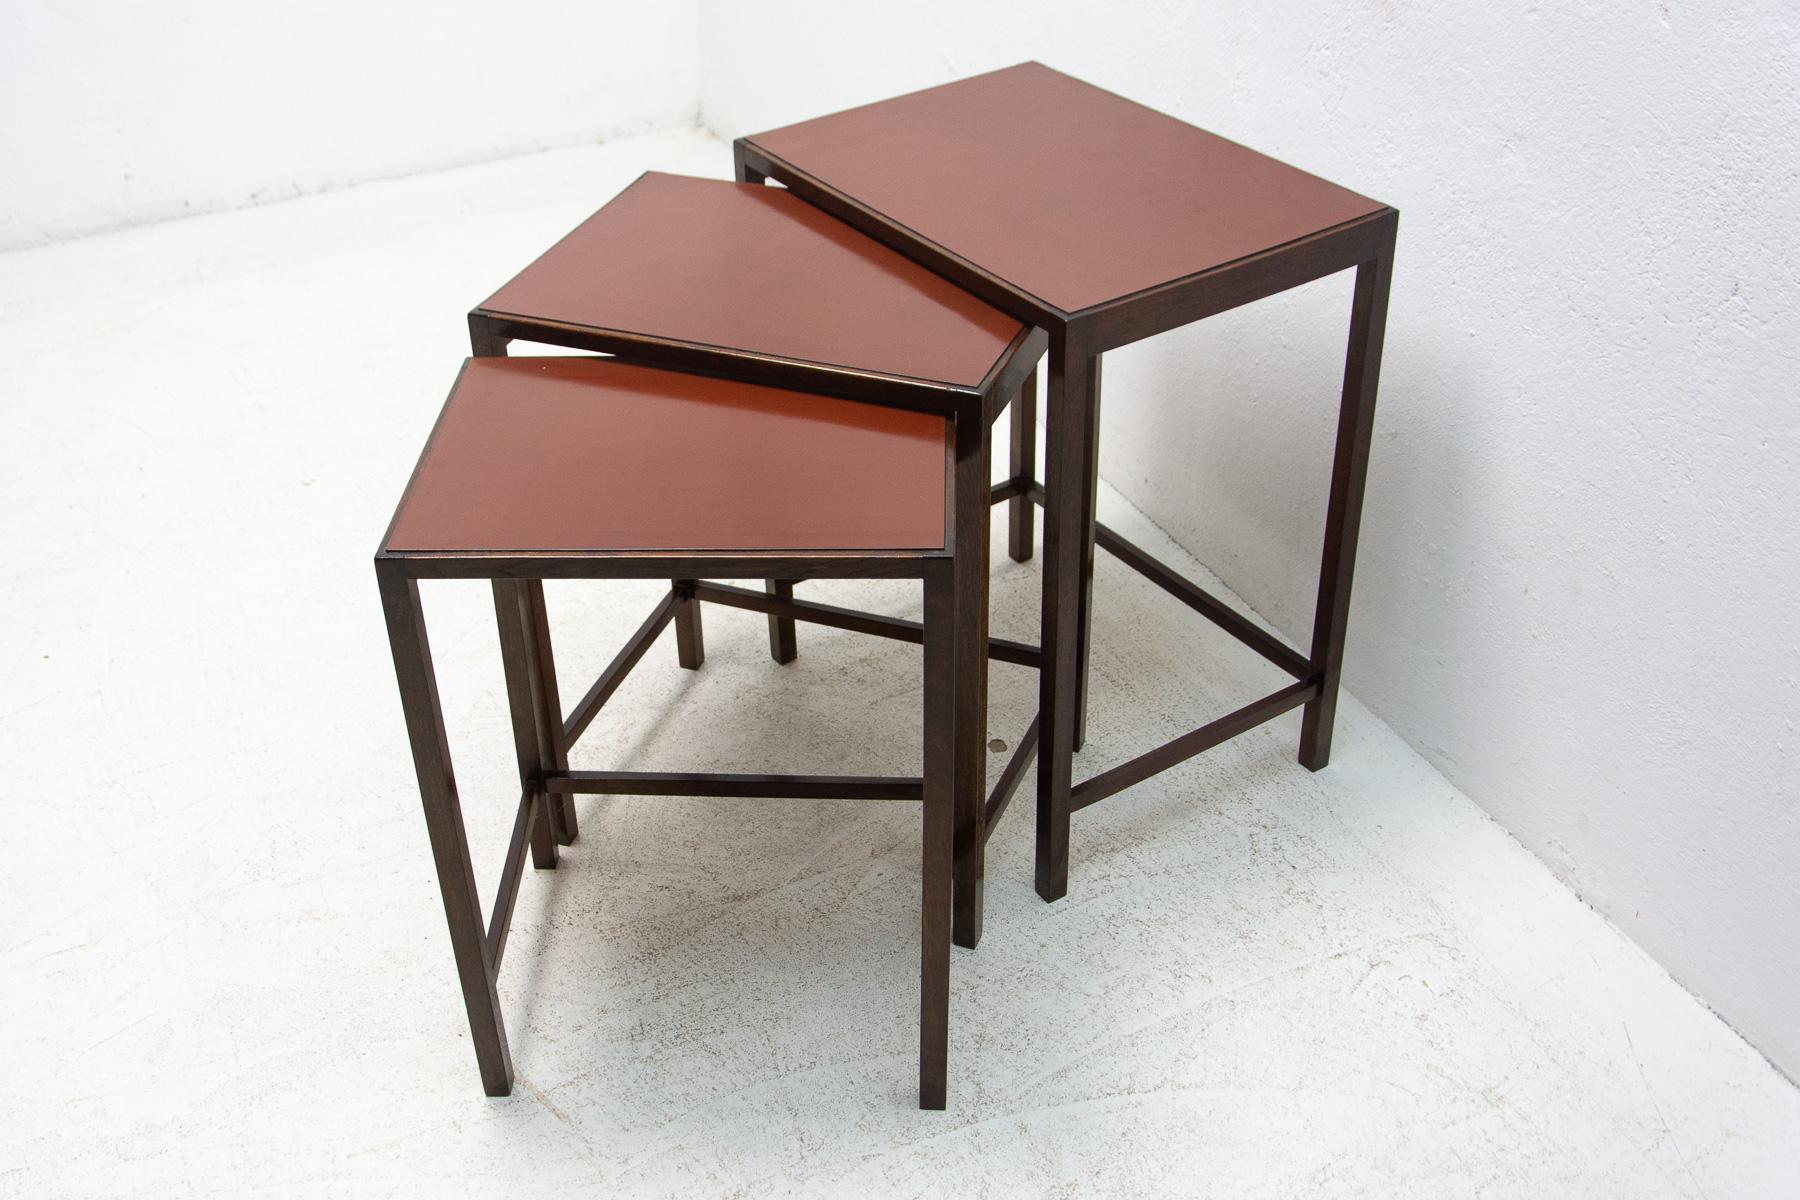 Jindrich Halabala, set of three nesting tables catalogue no. H-50, designed in the 1930s and produced in the 1950s. It´s made of stained beech wood and it features a dark bakelite top. It is in very good vintage condition.

Measures: Height: 67